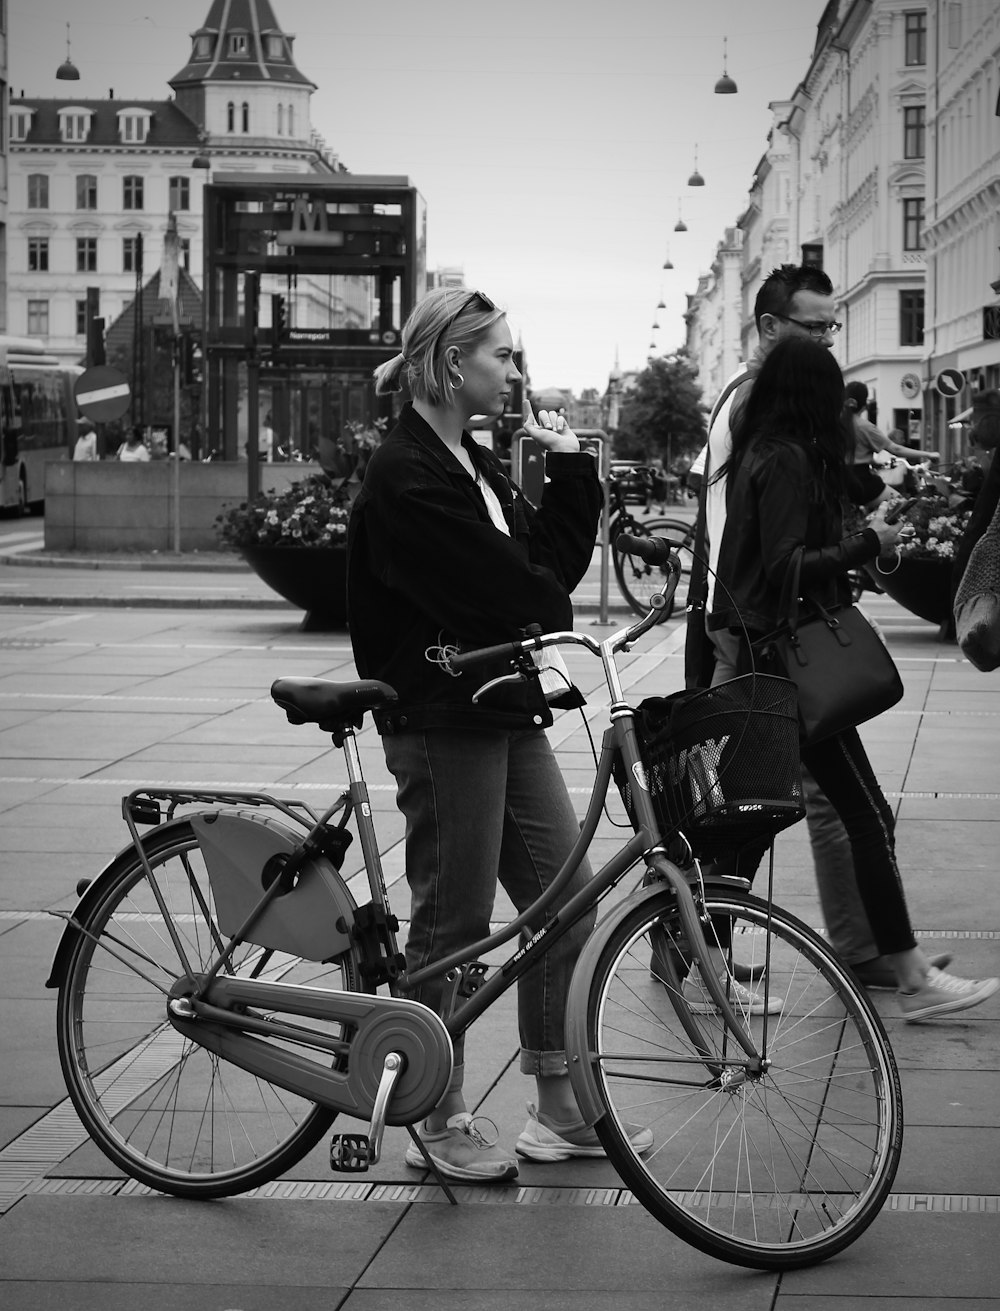 grayscale photo of woman in black jacket and pants riding on bicycle